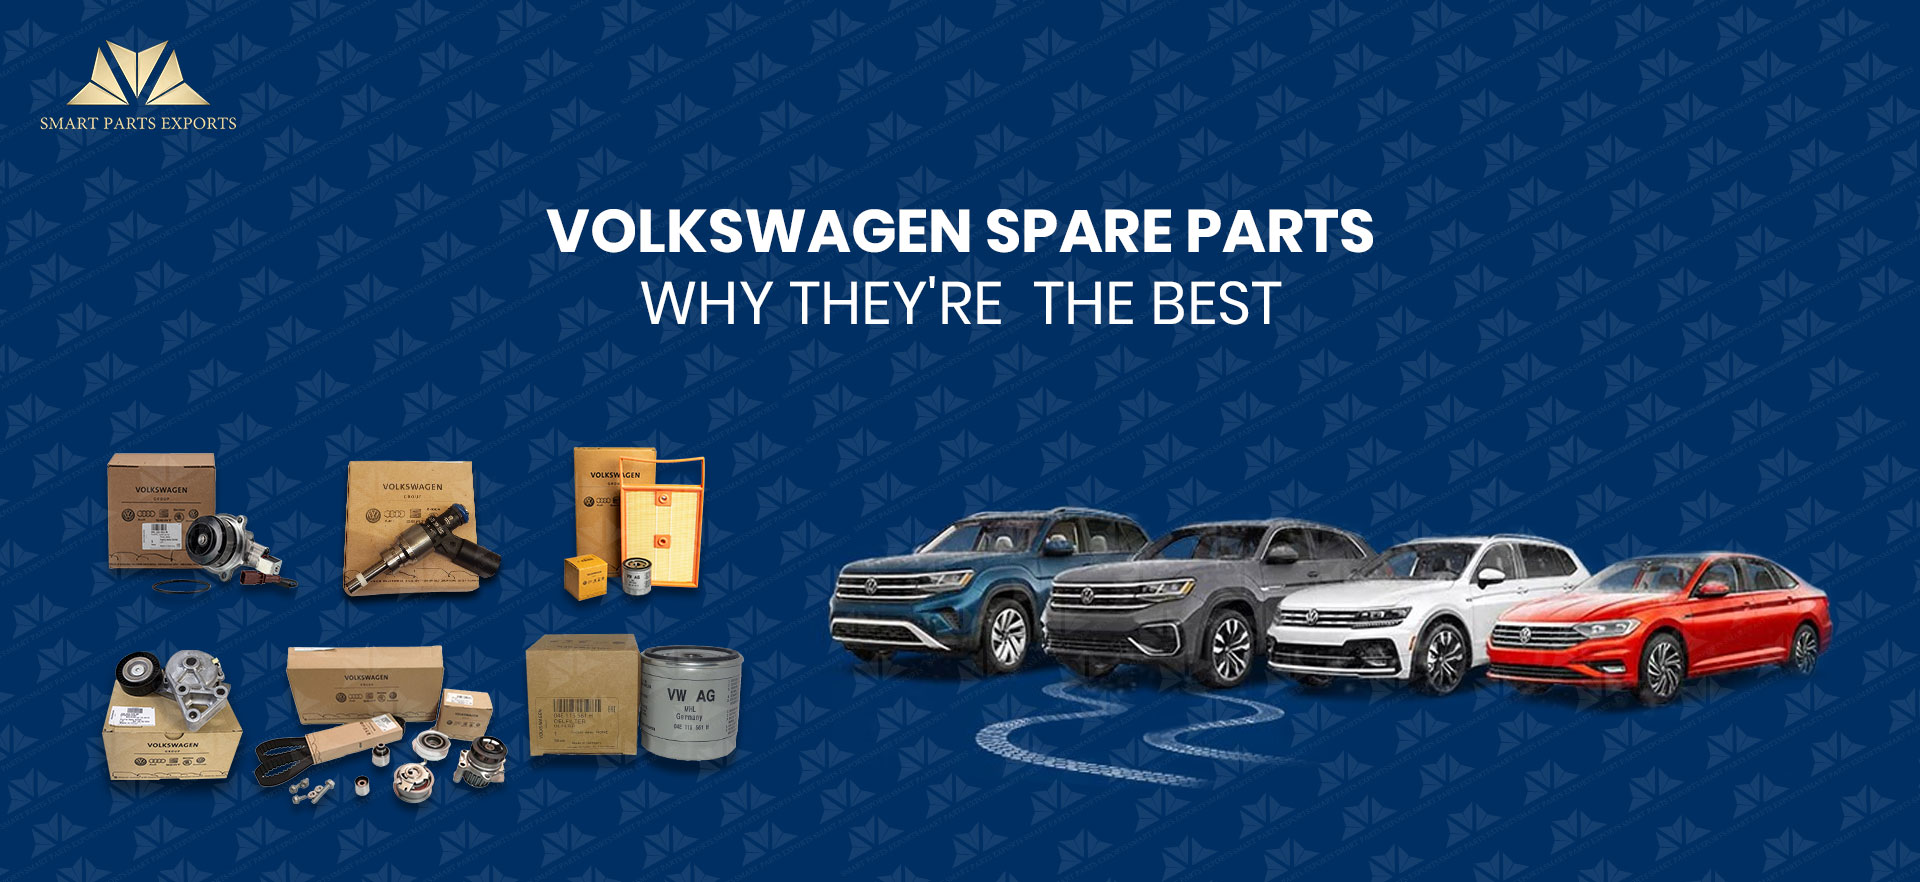 Volkswagen Spare Parts: Why They're the Best